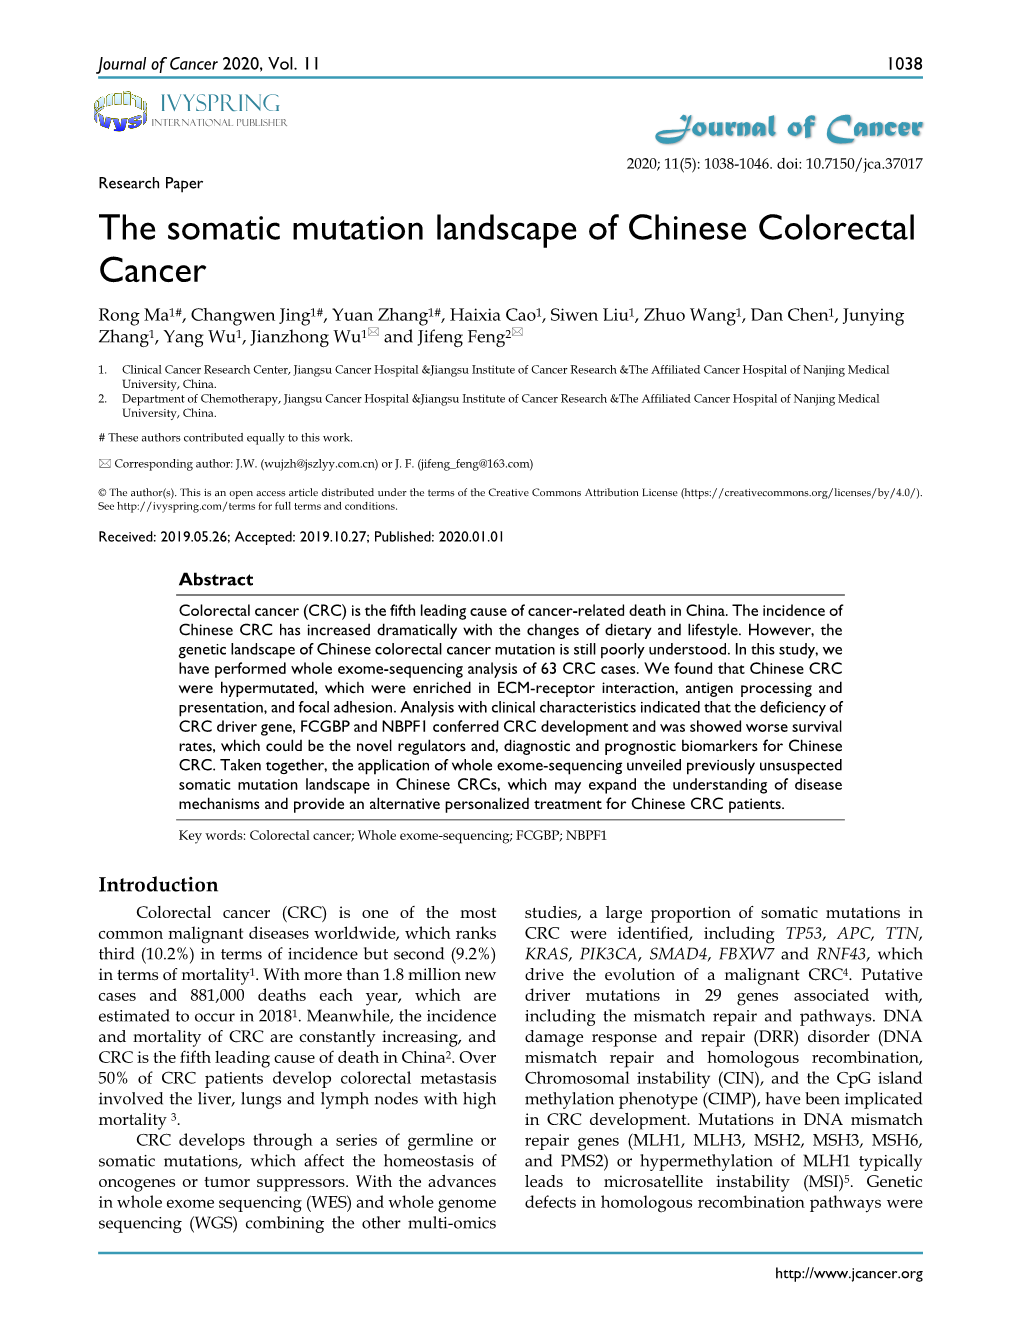 The Somatic Mutation Landscape of Chinese Colorectal Cancer